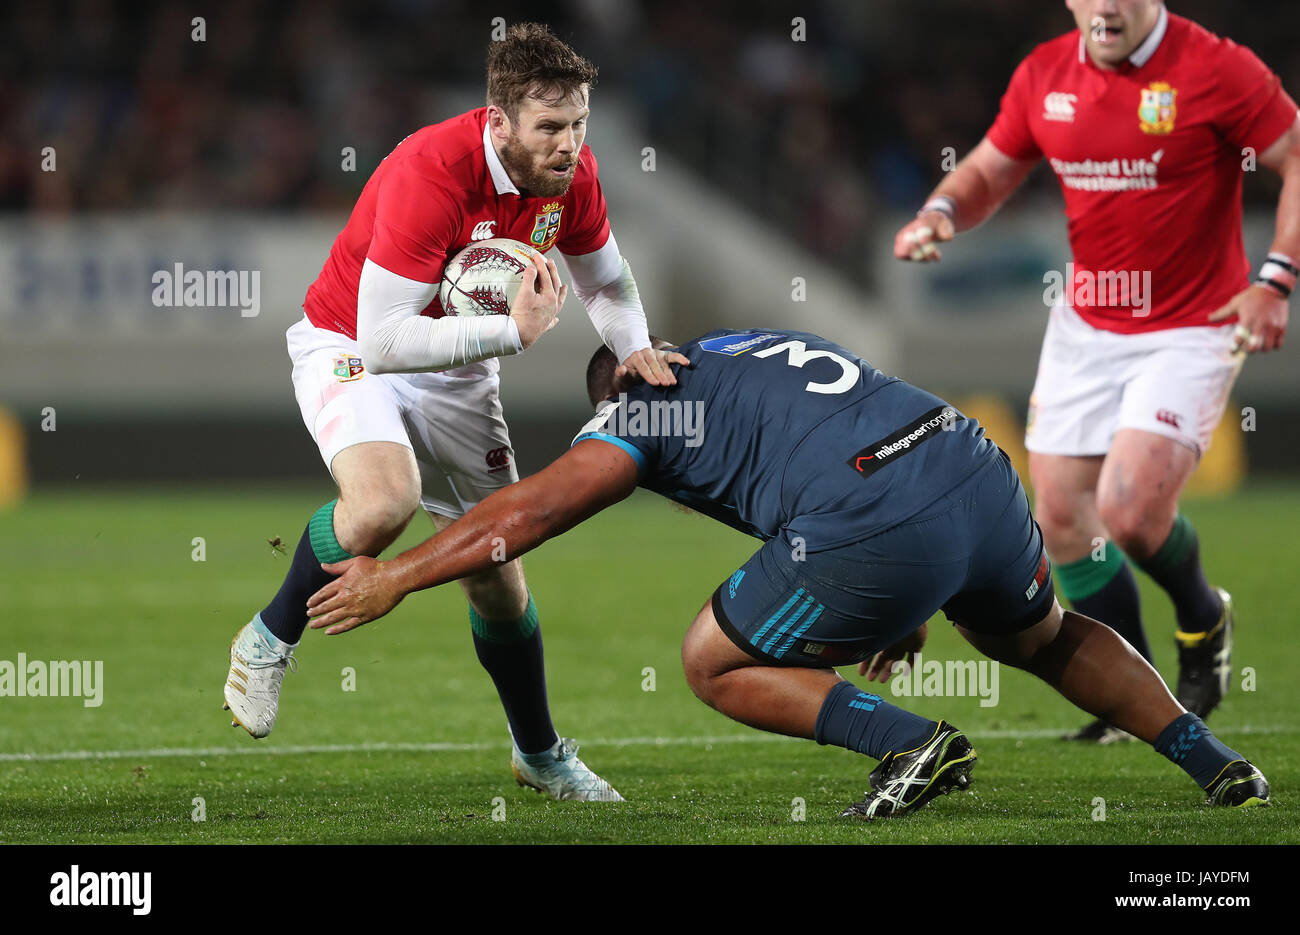 British & Irish Lions Elliot Daly during the tour match at Eden Park, Auckland. PRESS ASSOCIATION Photo. Picture date: Wednesday June 7, 2017 Stock Photo